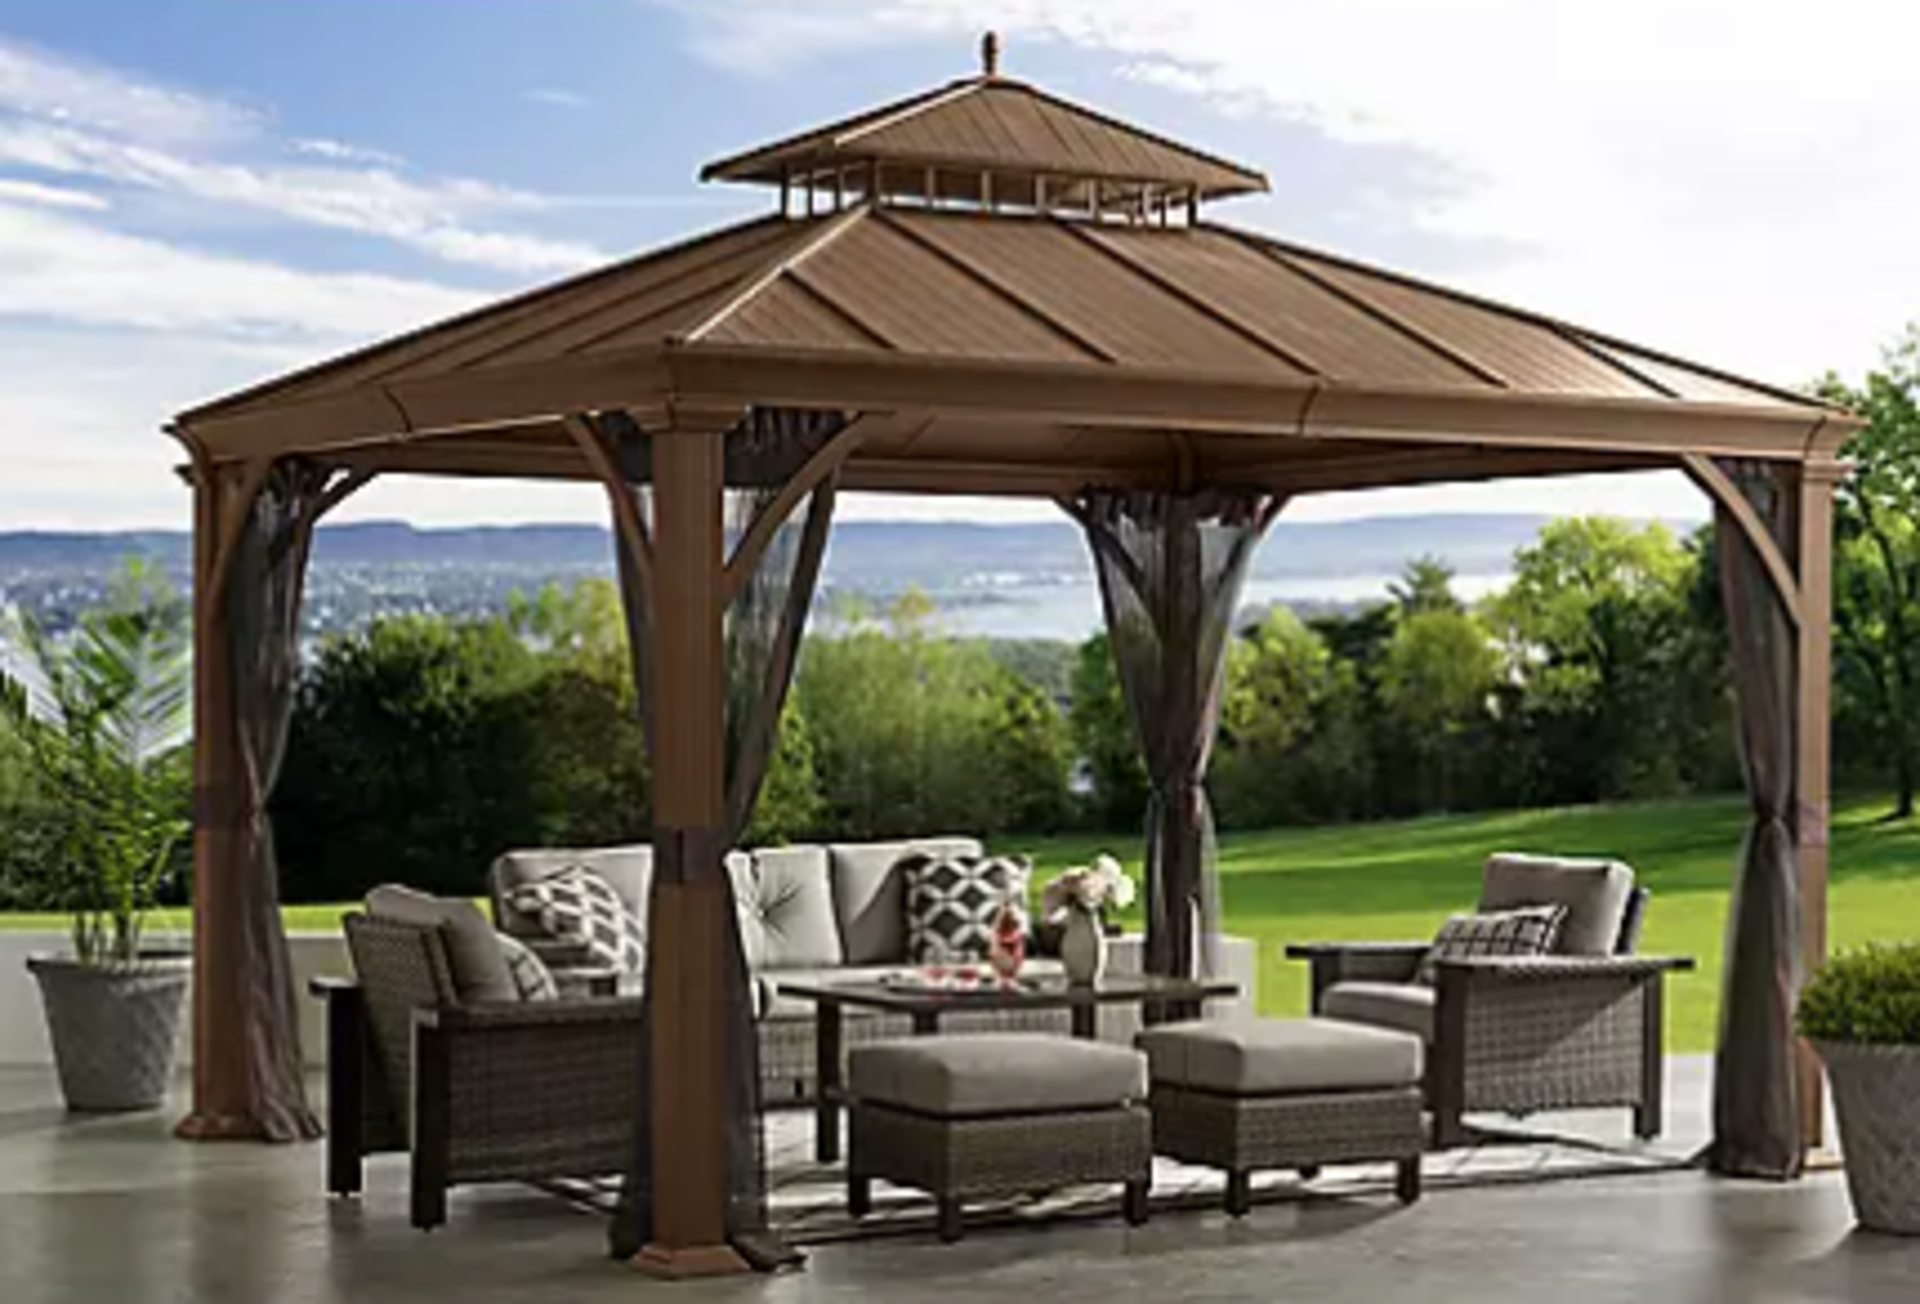 Gazebos, grill, AC, and more